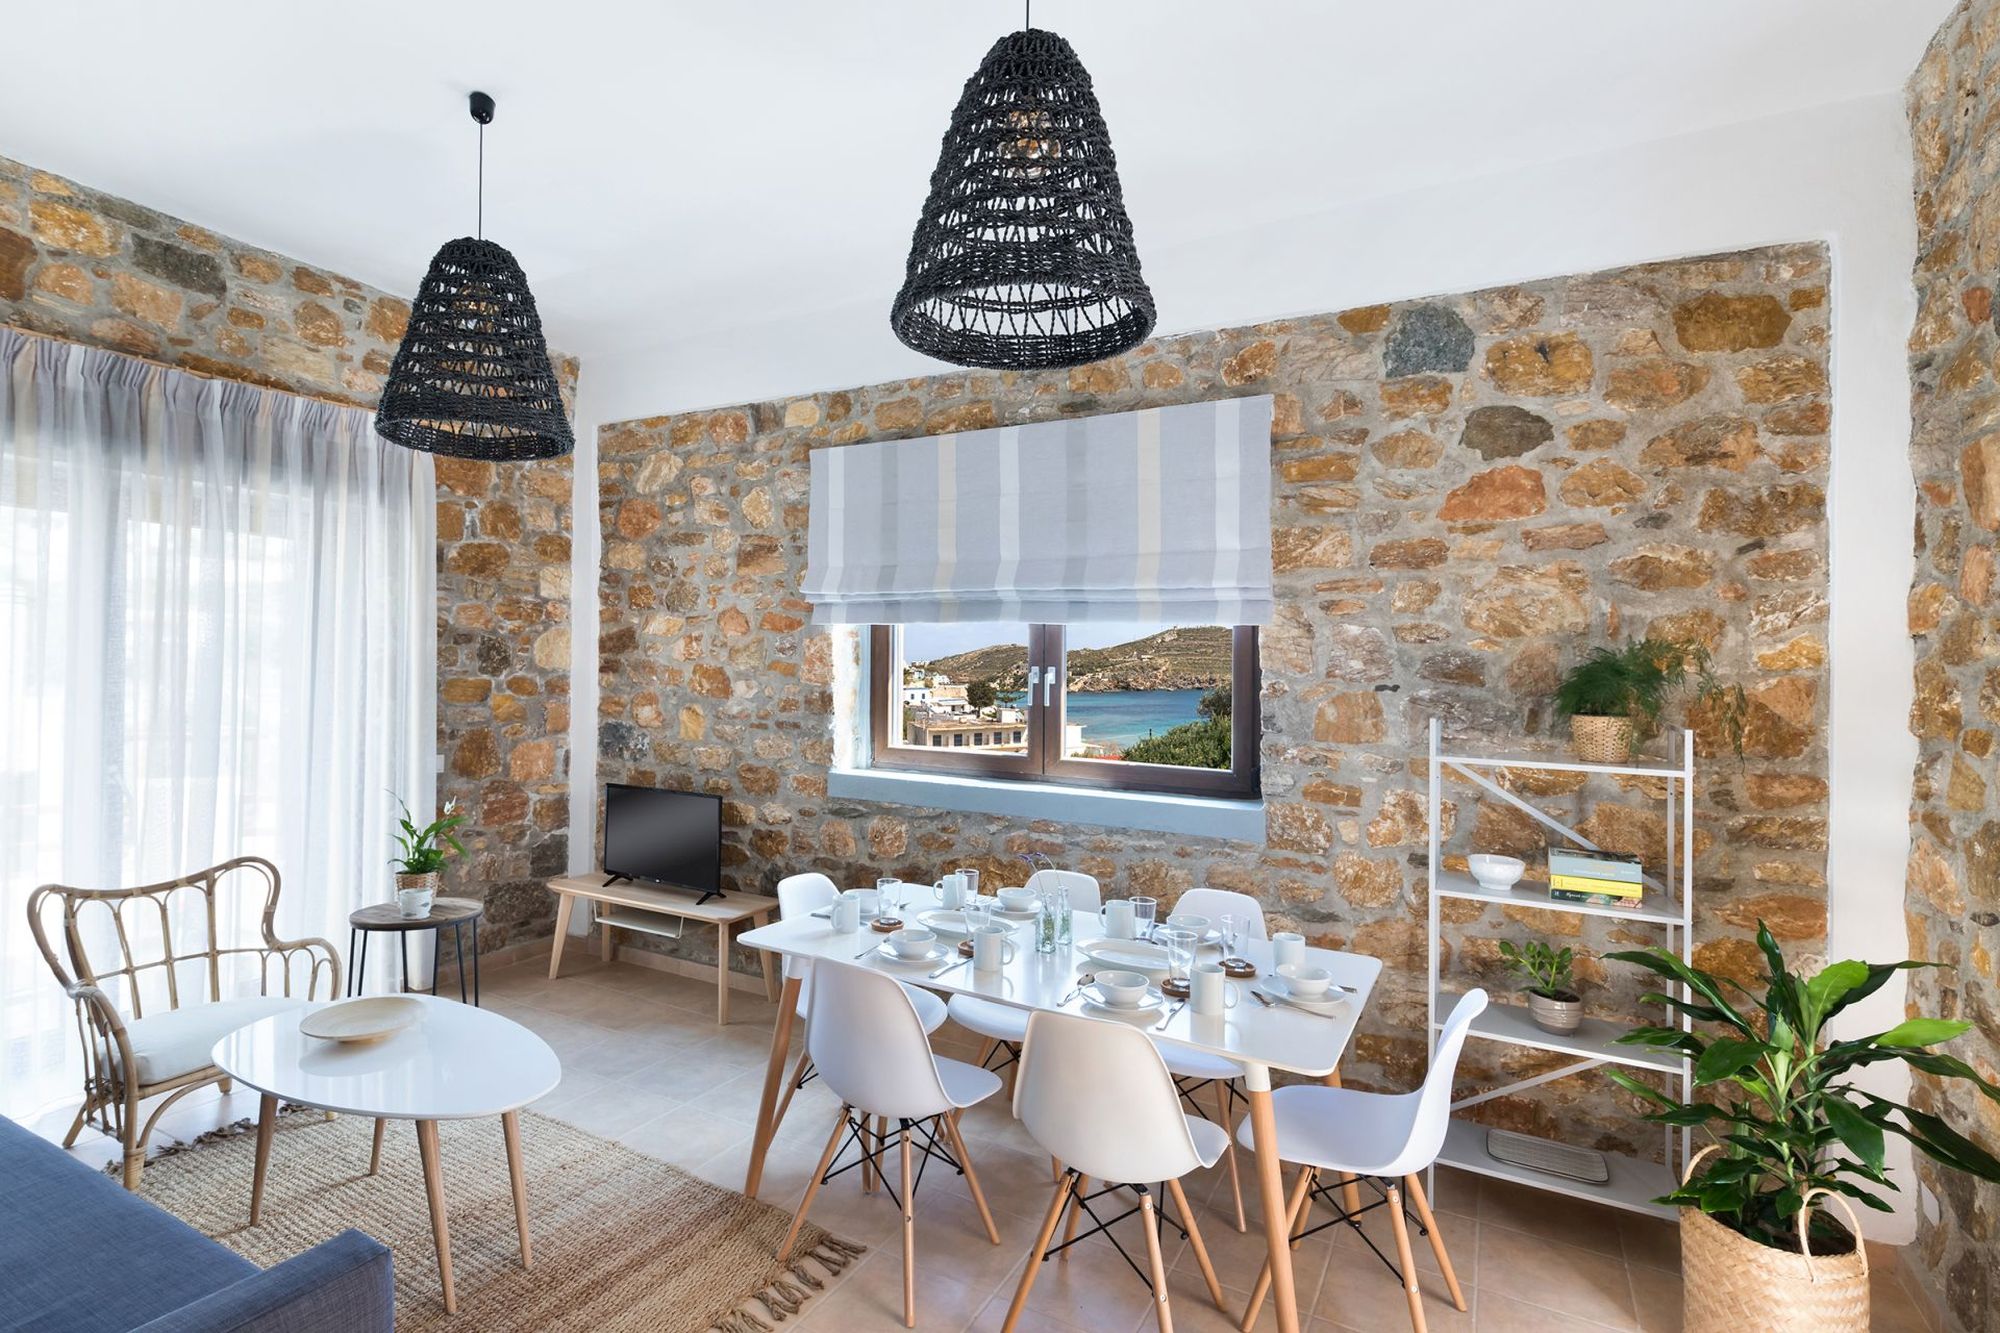 Dining area in same space with the living room of a stone built Syra Suite residence with a white dining table for six persons and a sea view window over the table.